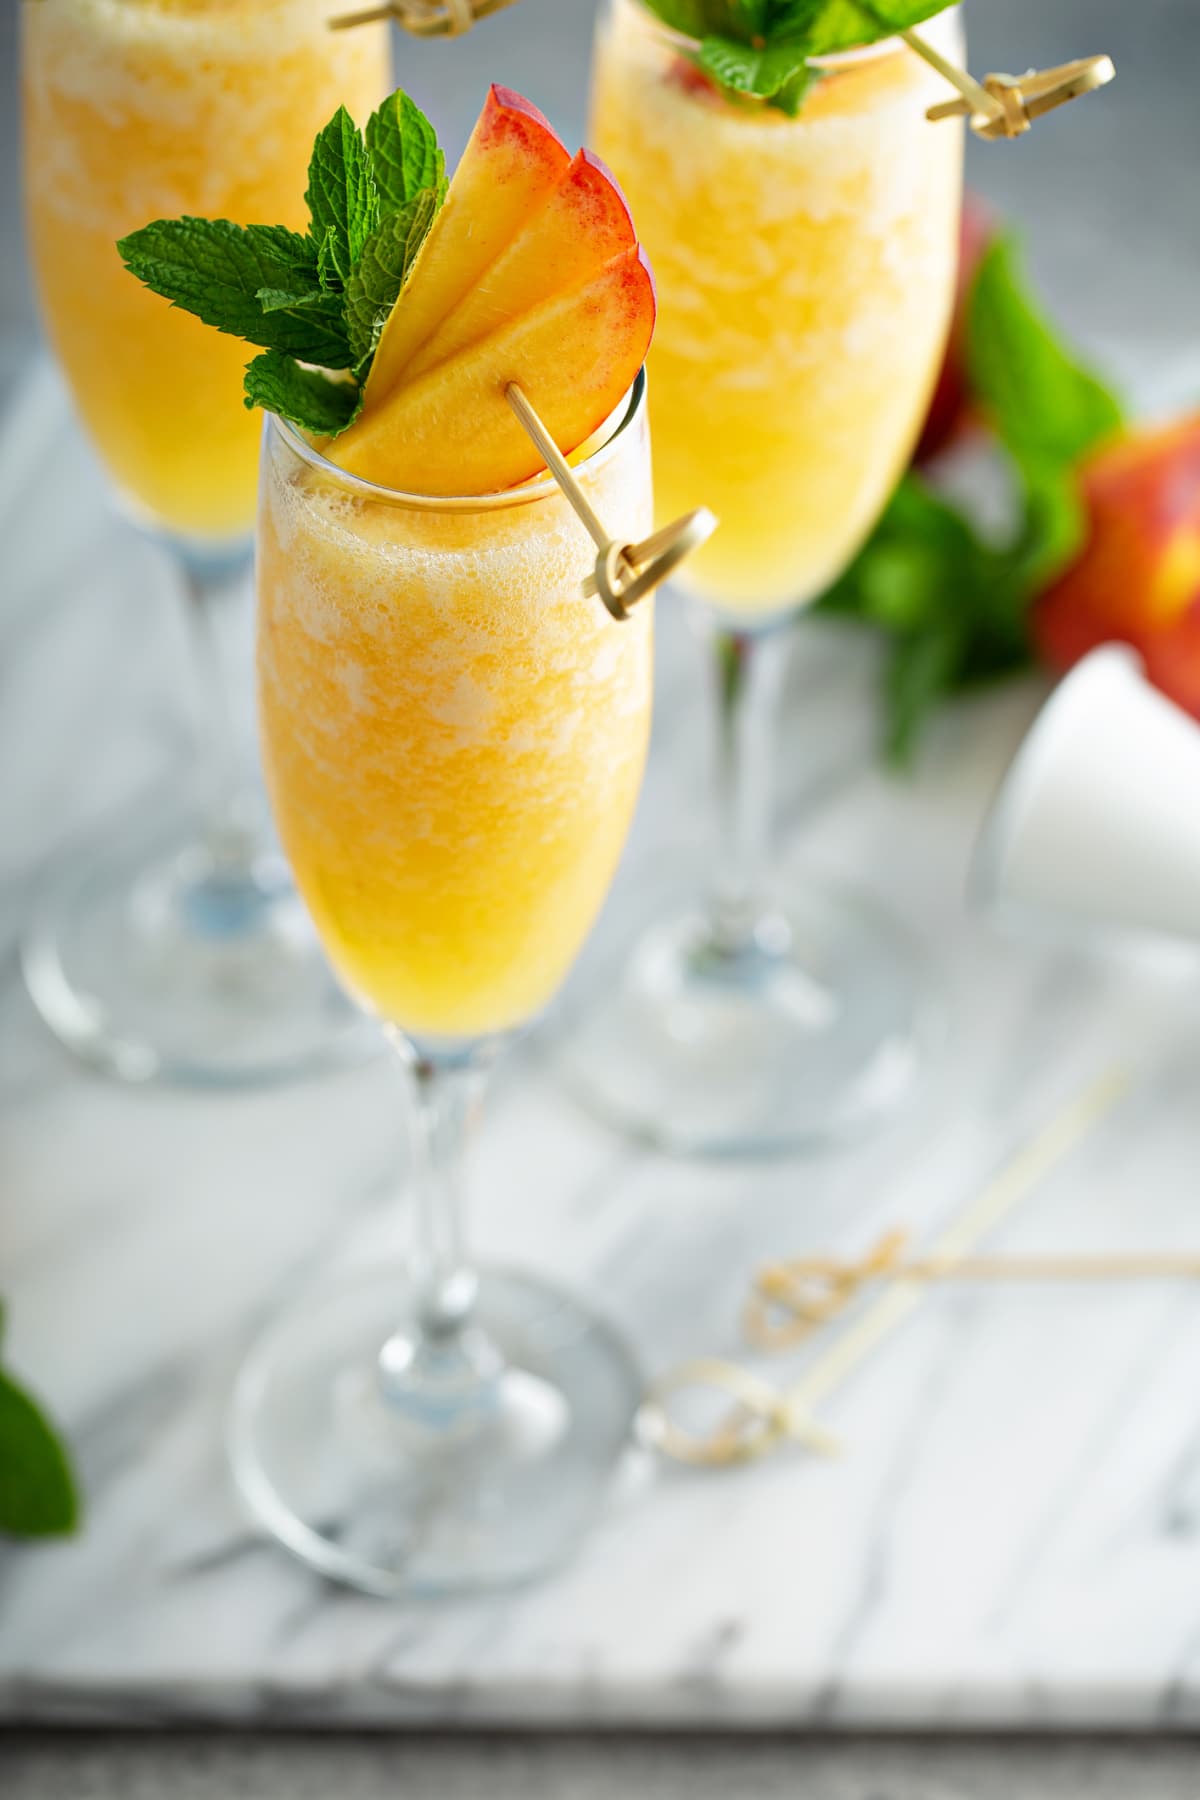 Peach mimosa or bellini cocktails for brunch